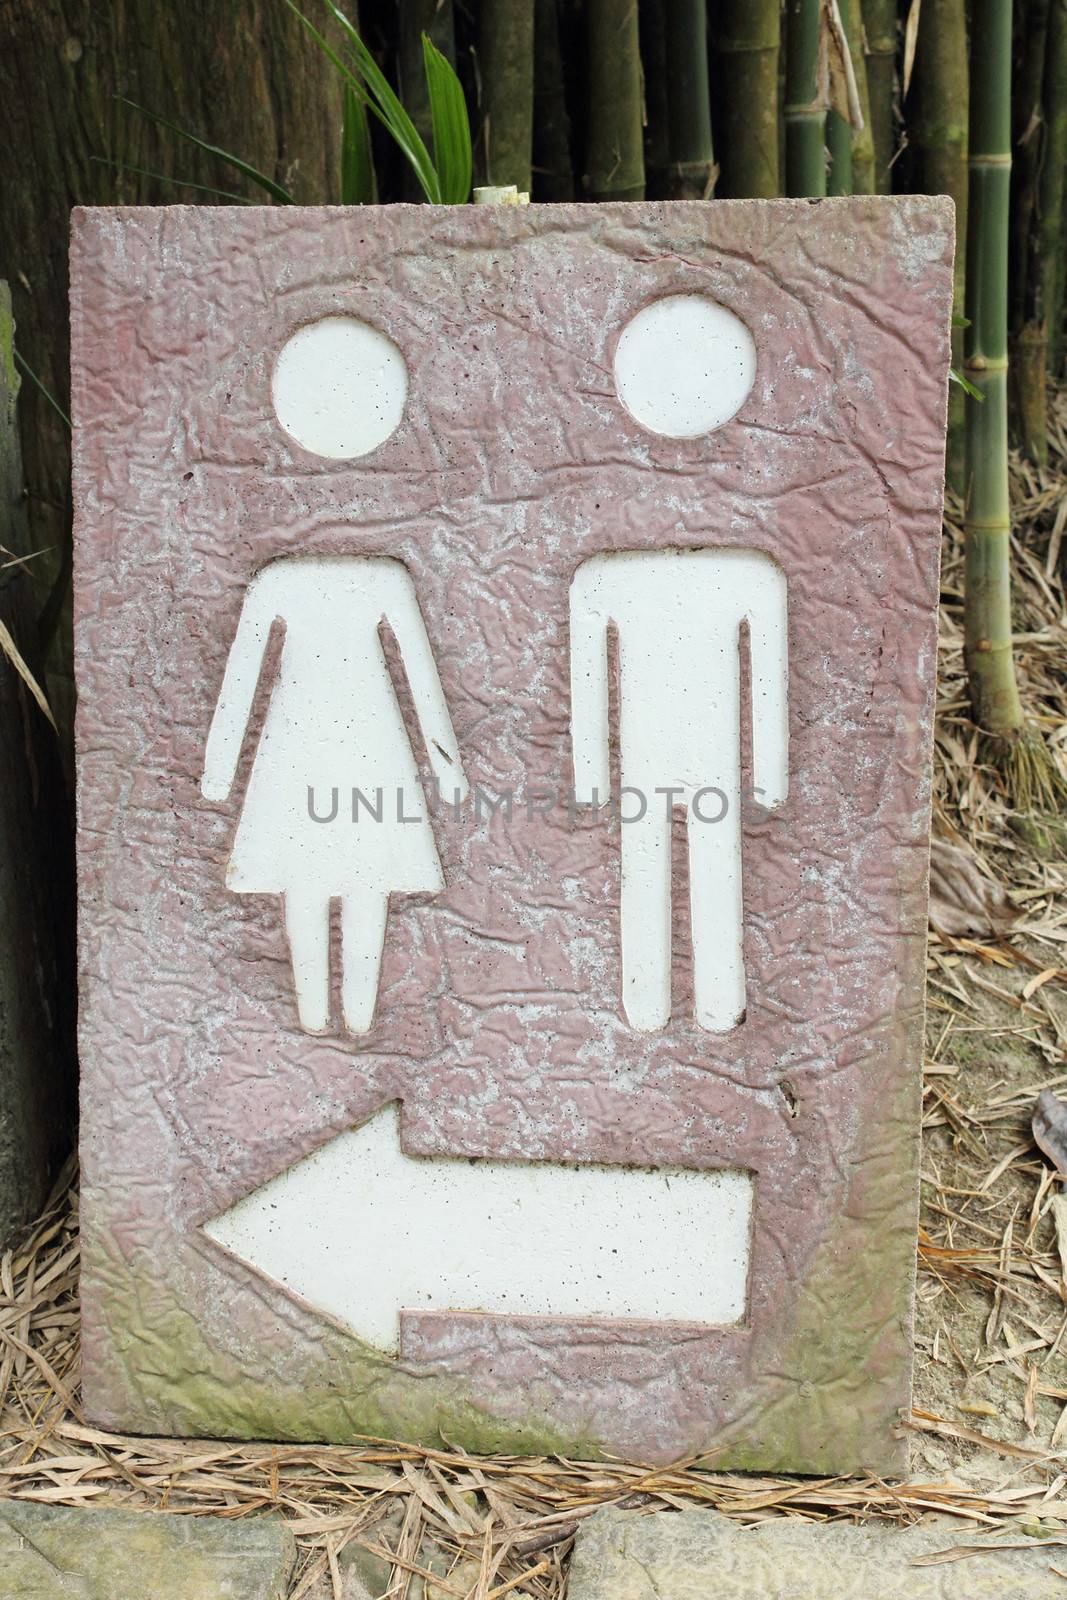 Simple icons of man and woman with an arrow below